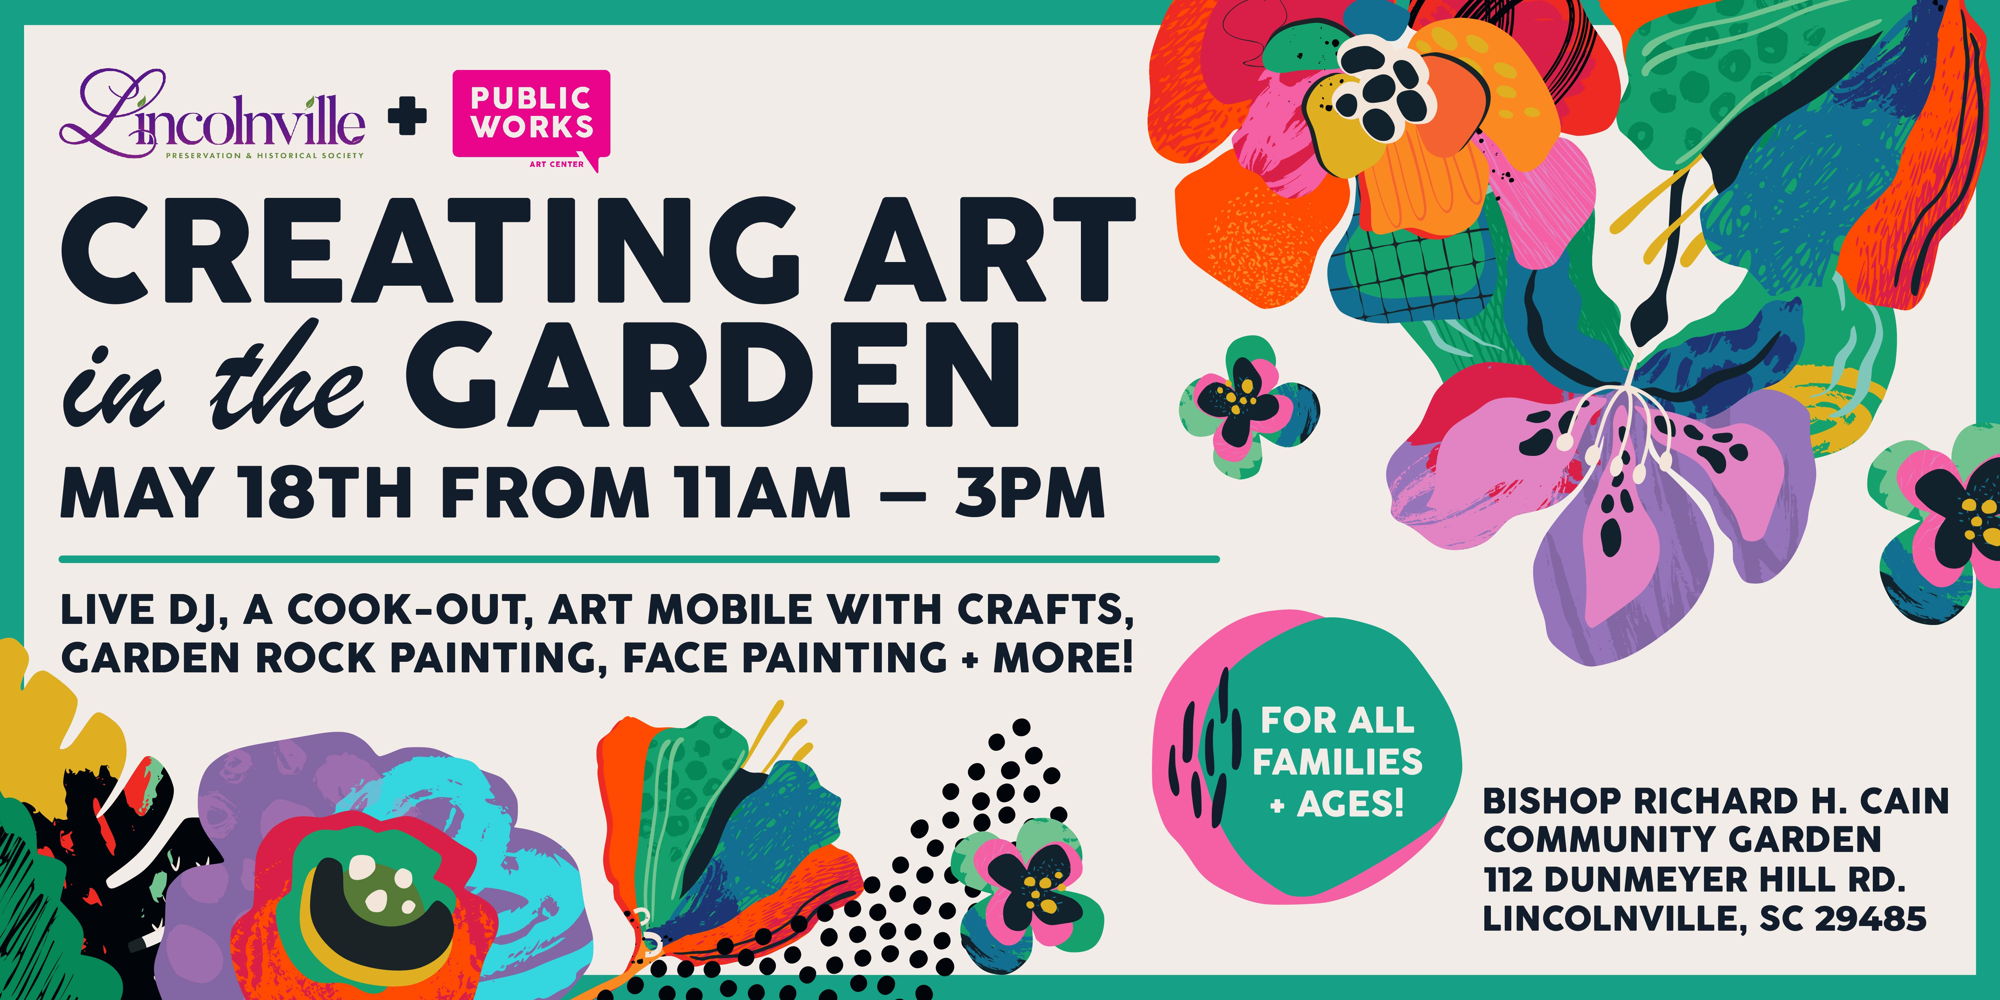 Creating Art in the Garden promotional image